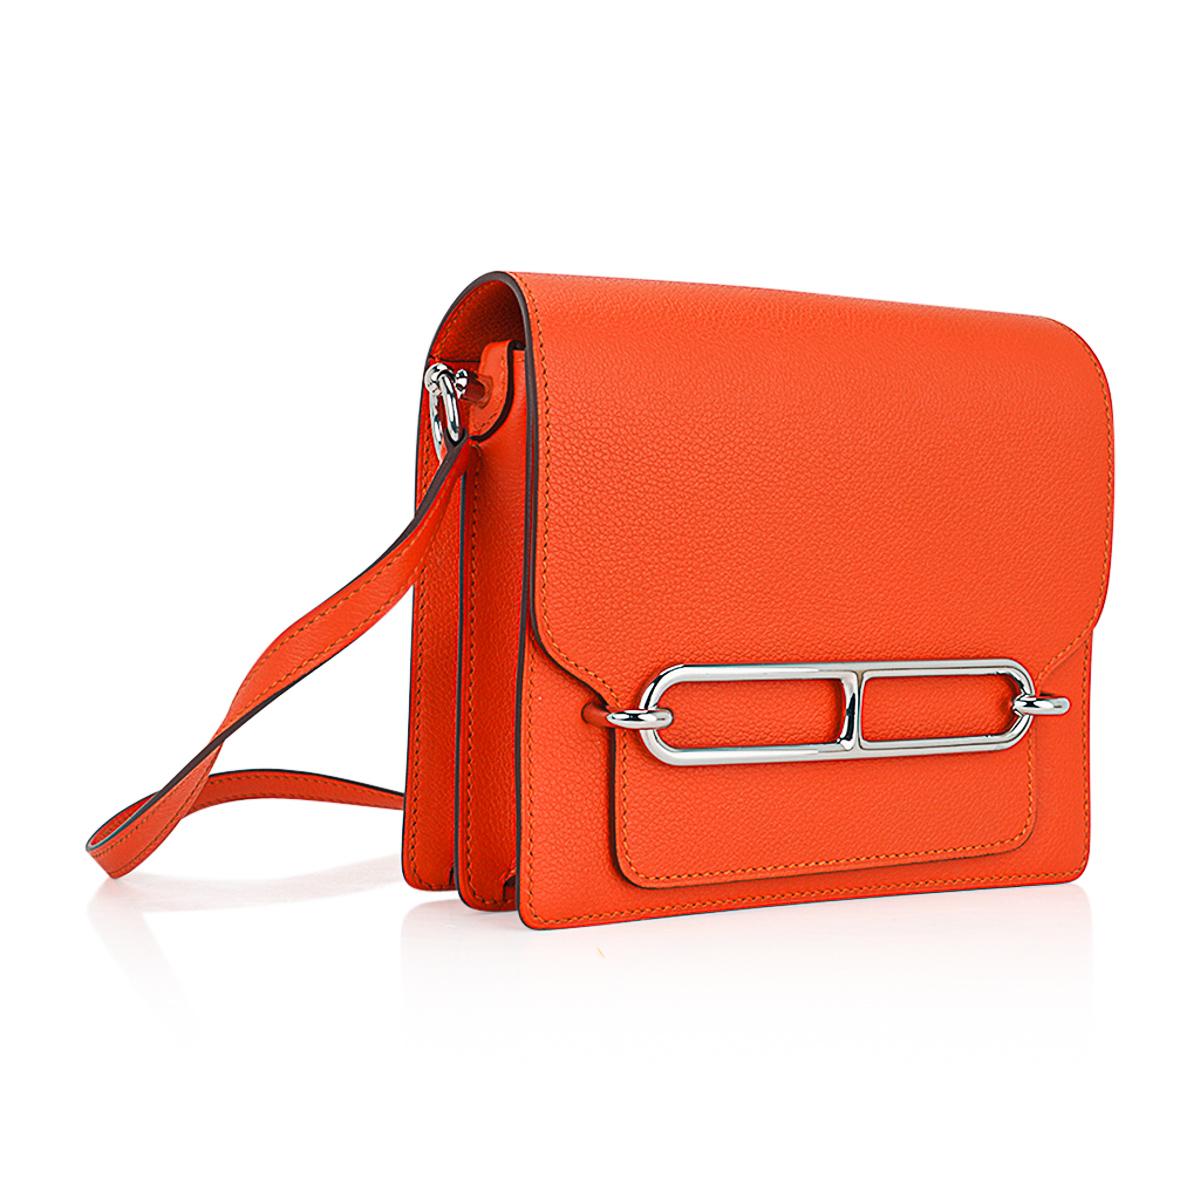 Mightychic offers an Hermes mini Roulis bag featured in Feu orange Evercolor leather.
Functional with interior compartments and a rear outer pocket.
The adjustable strap allows the bag to be carried as a crossbody or shoulder bag.
The square shape